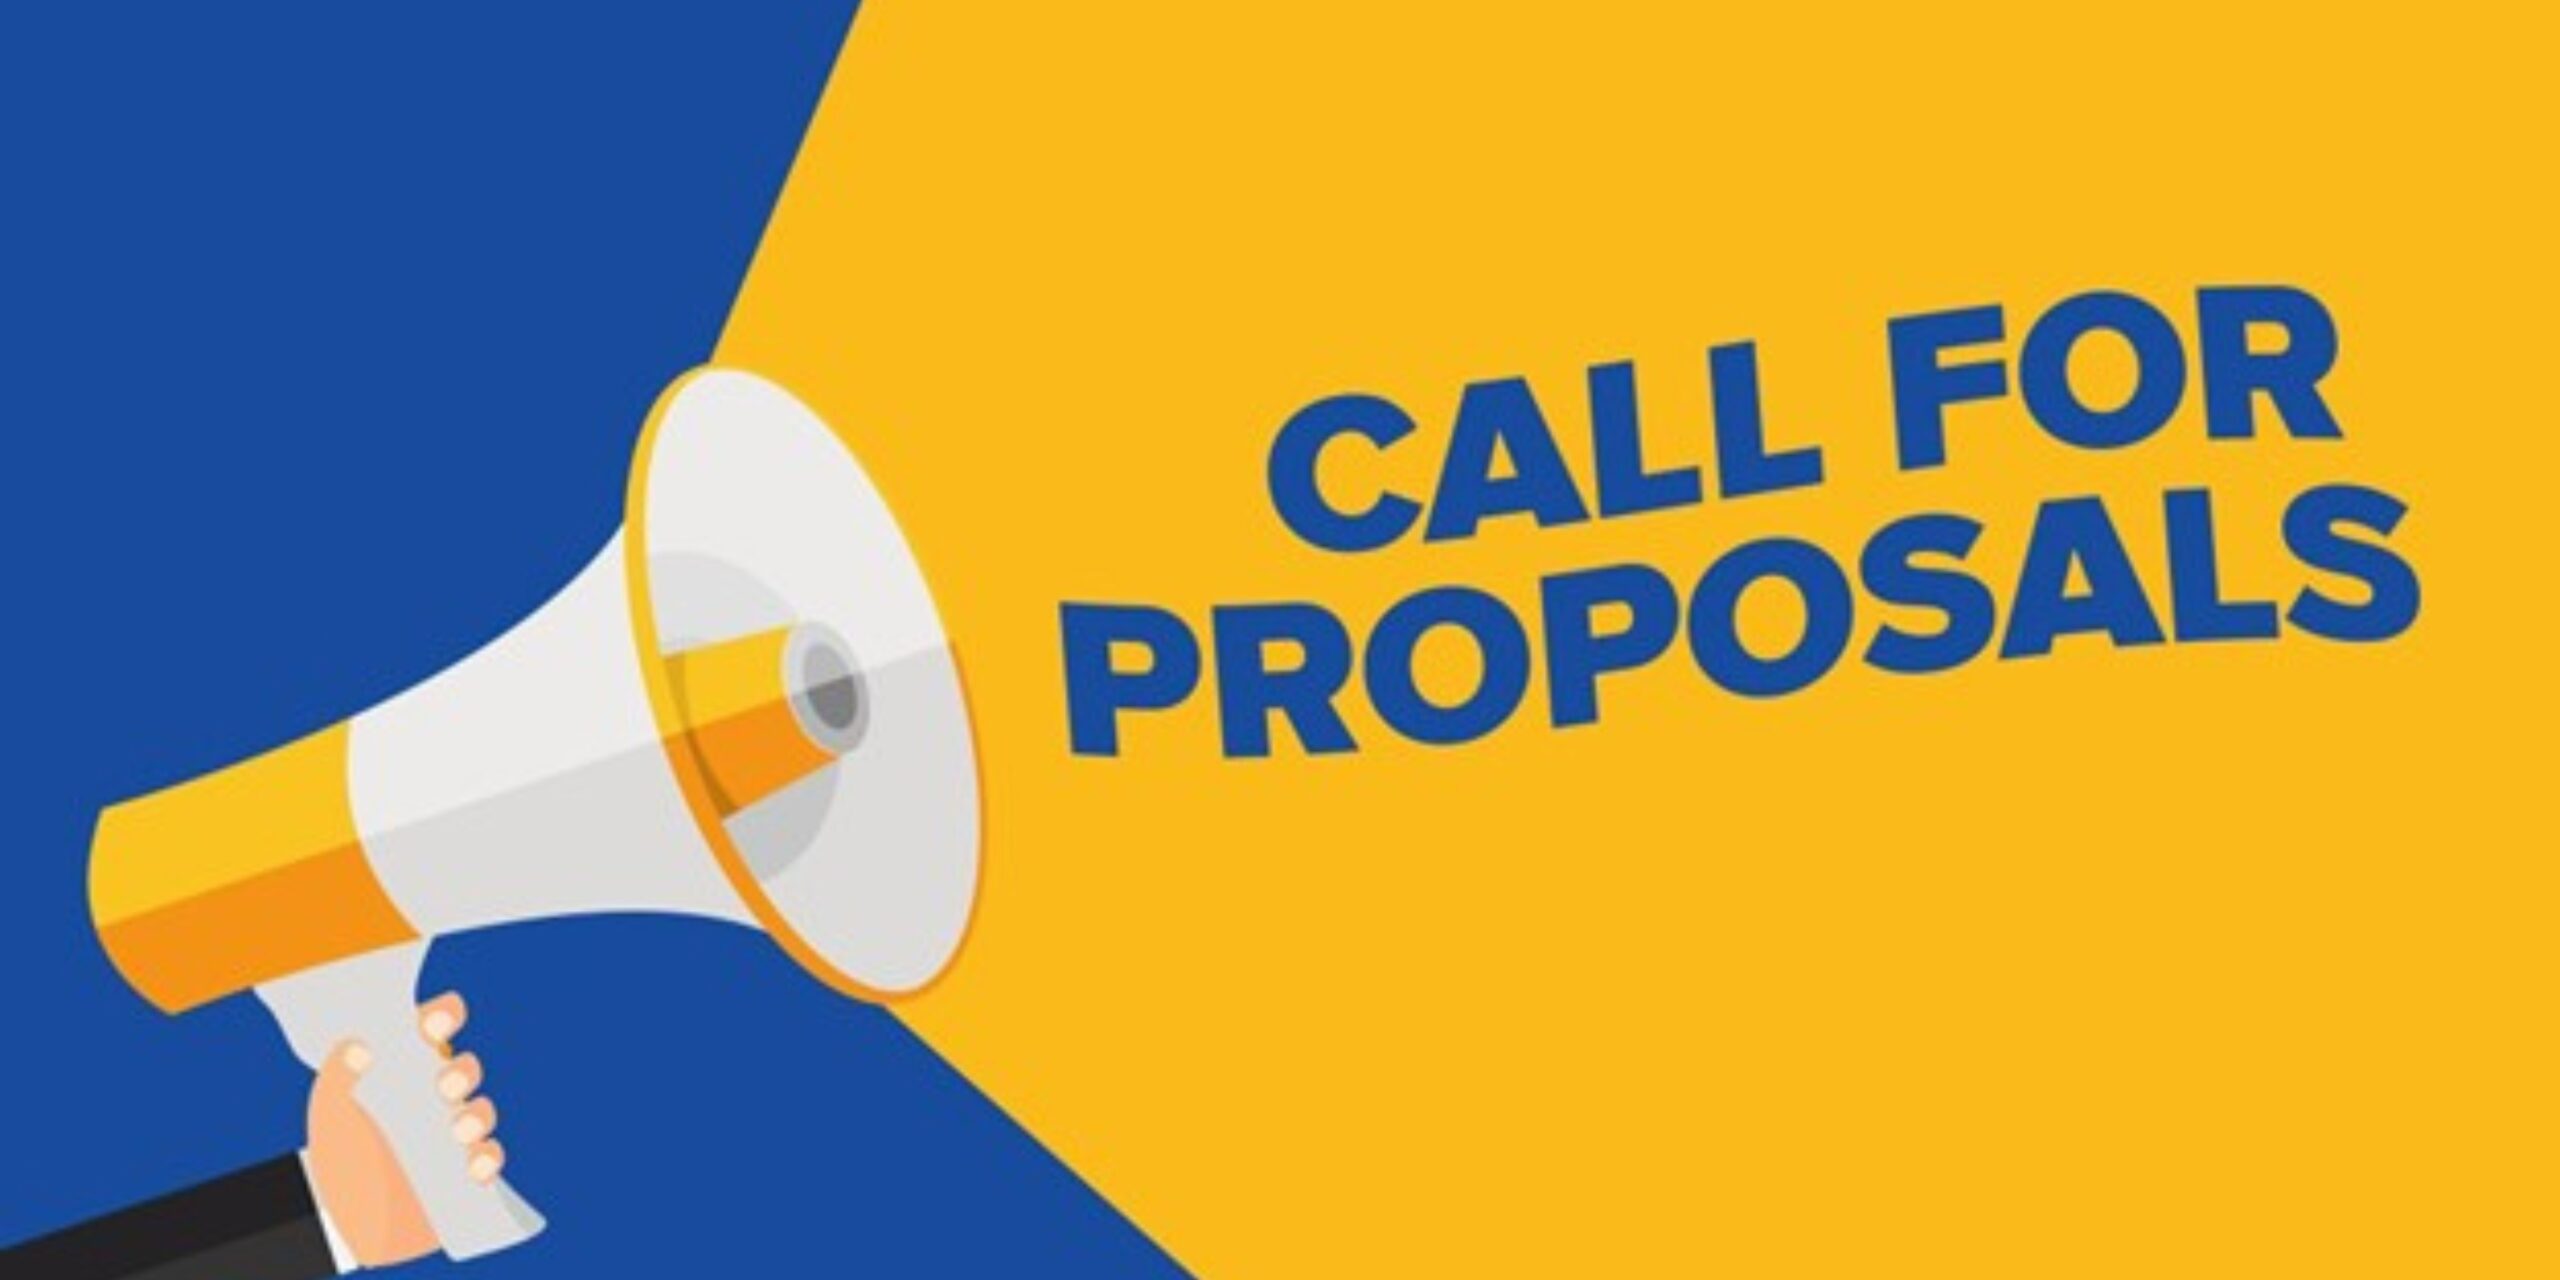 European Commission Call for Proposals